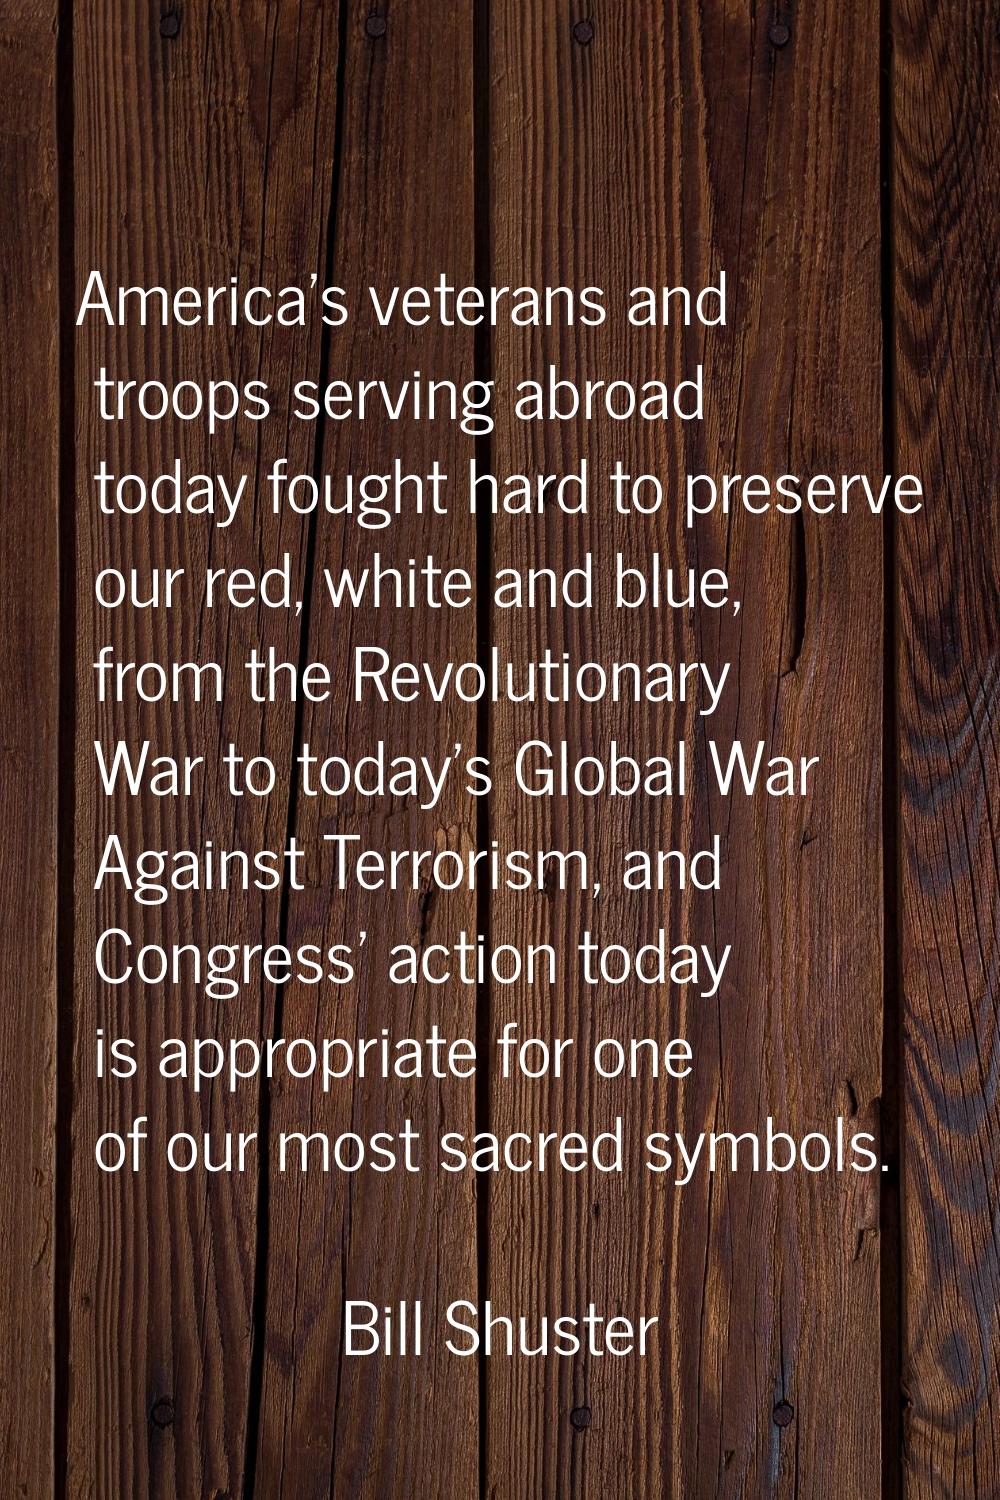 America's veterans and troops serving abroad today fought hard to preserve our red, white and blue,